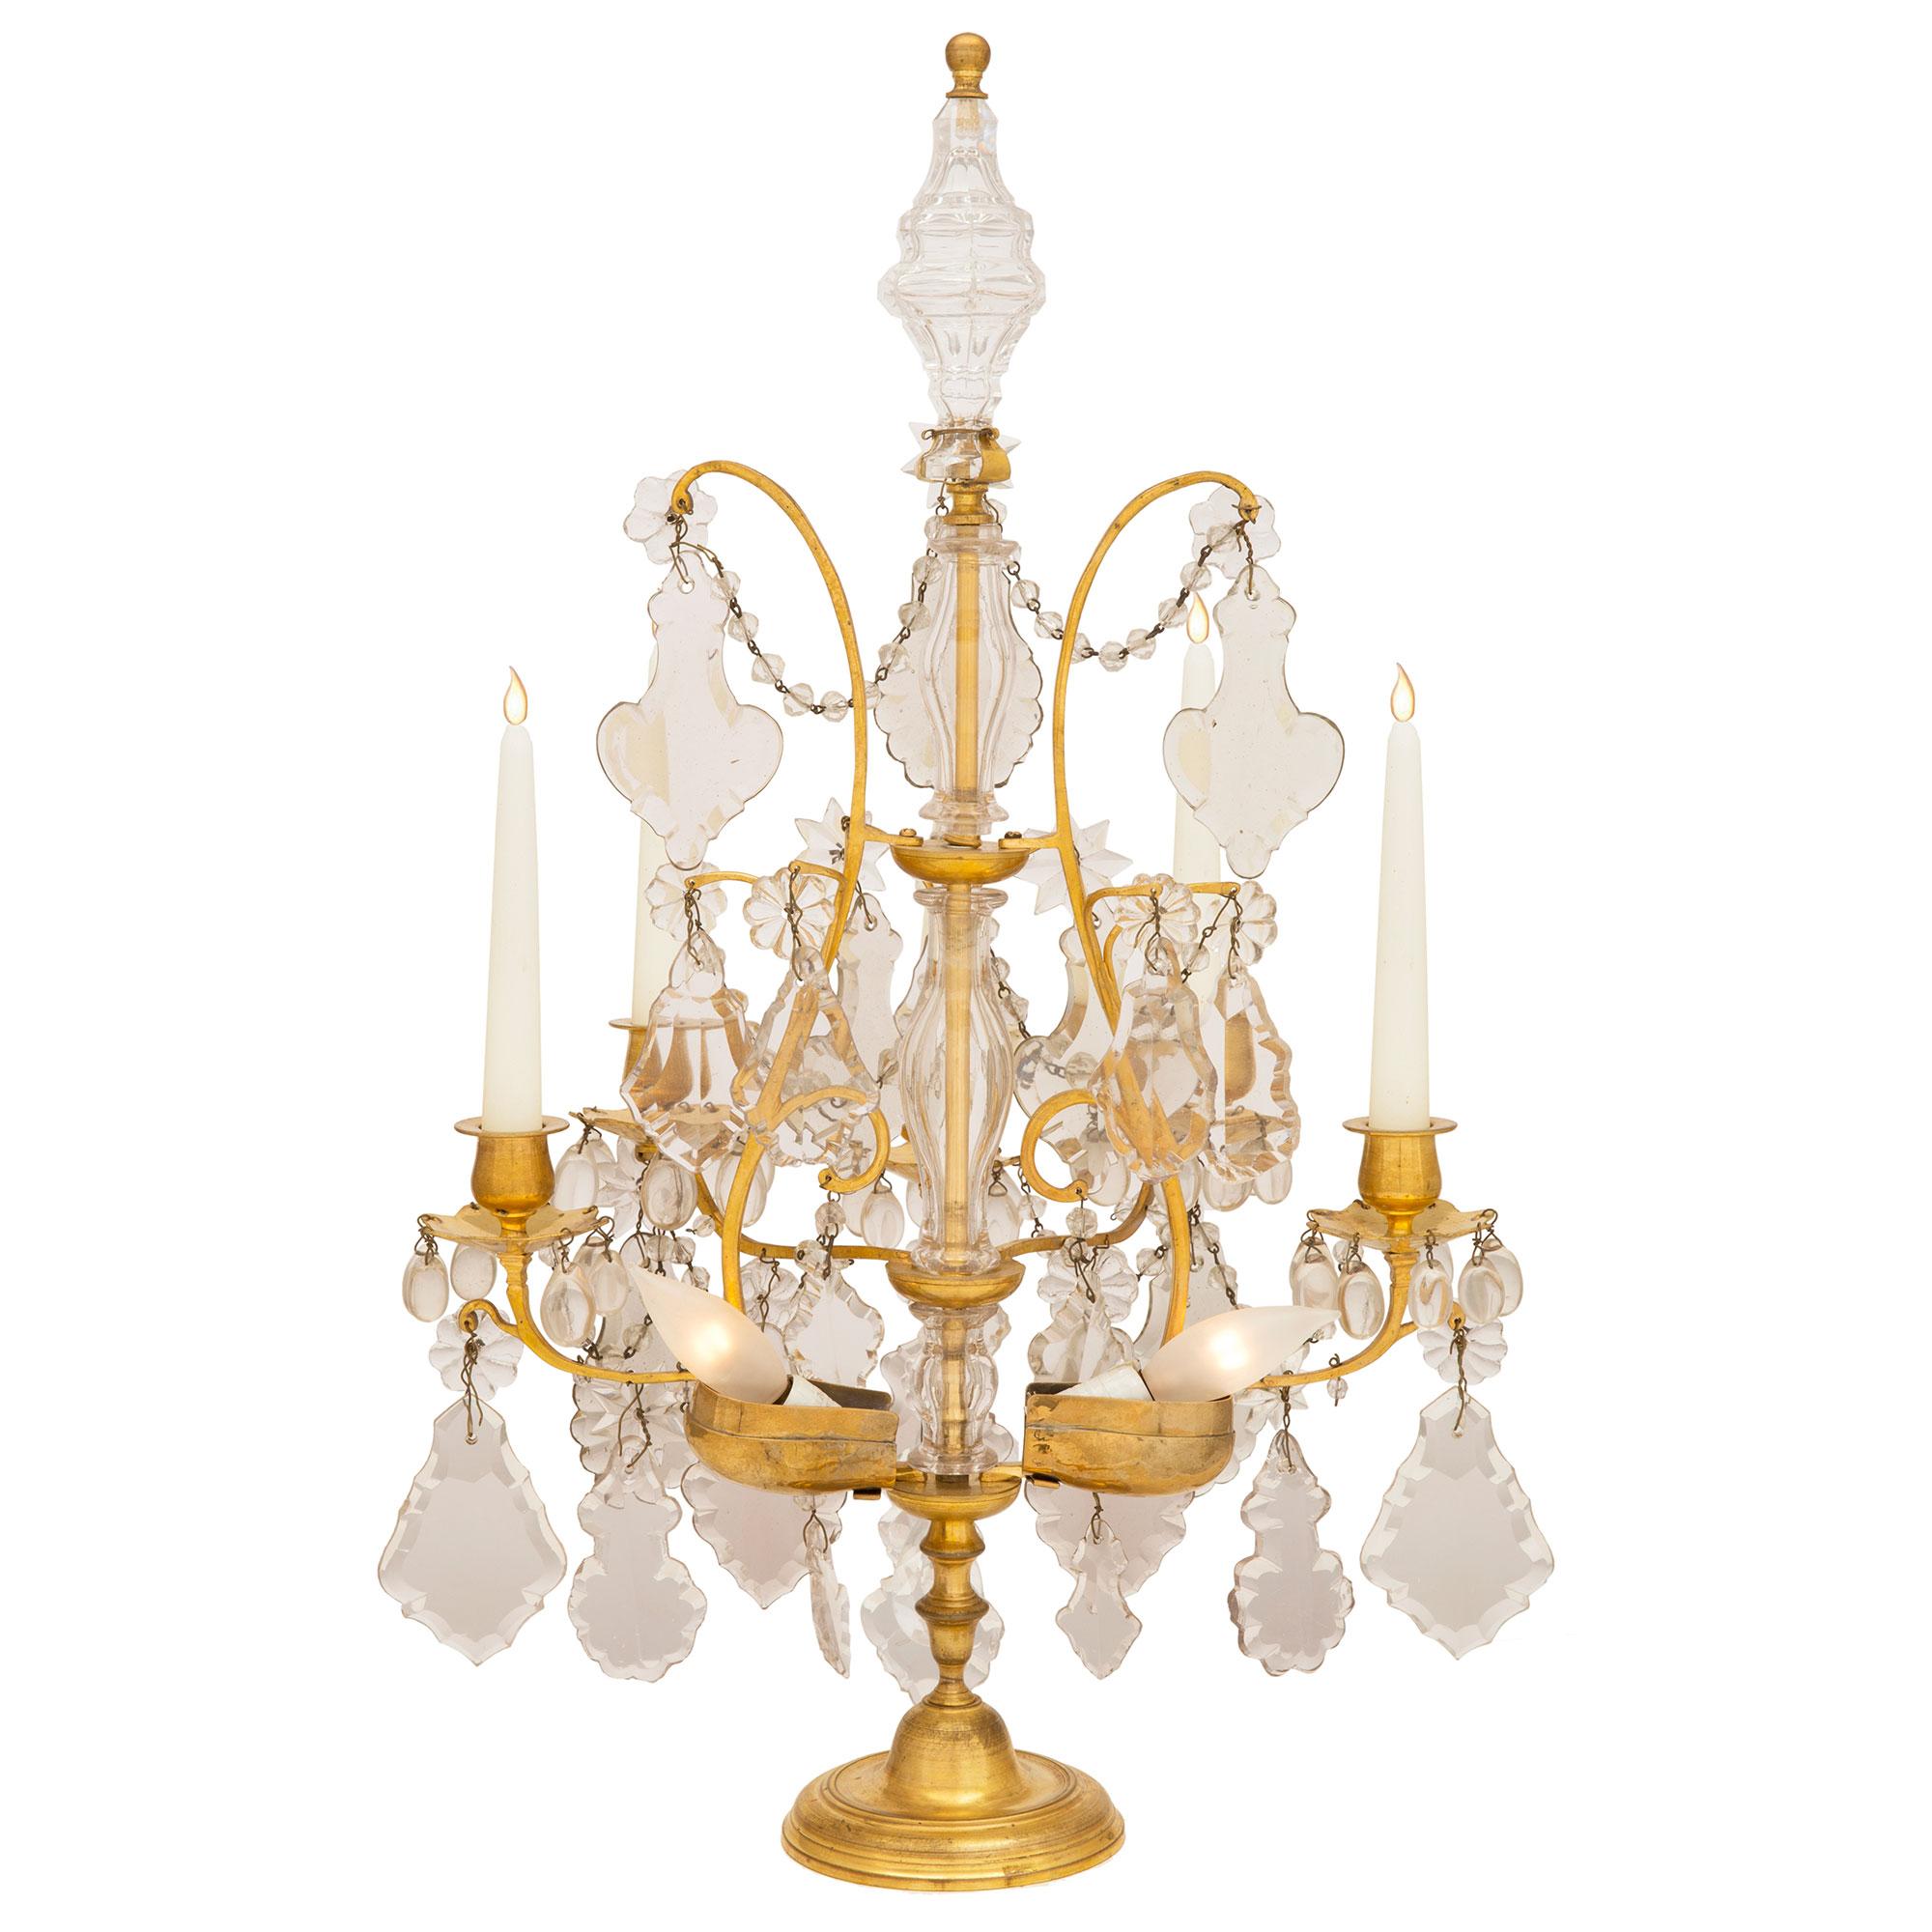 An elegant pair of French 19th century Louis XV st. electrified Baccarat crystal and ormolu Girandole lamps. Each five arm, two light lamp is raised by a fine circular ormolu base with a lovely mottled design and fine turned shaped central futs. At